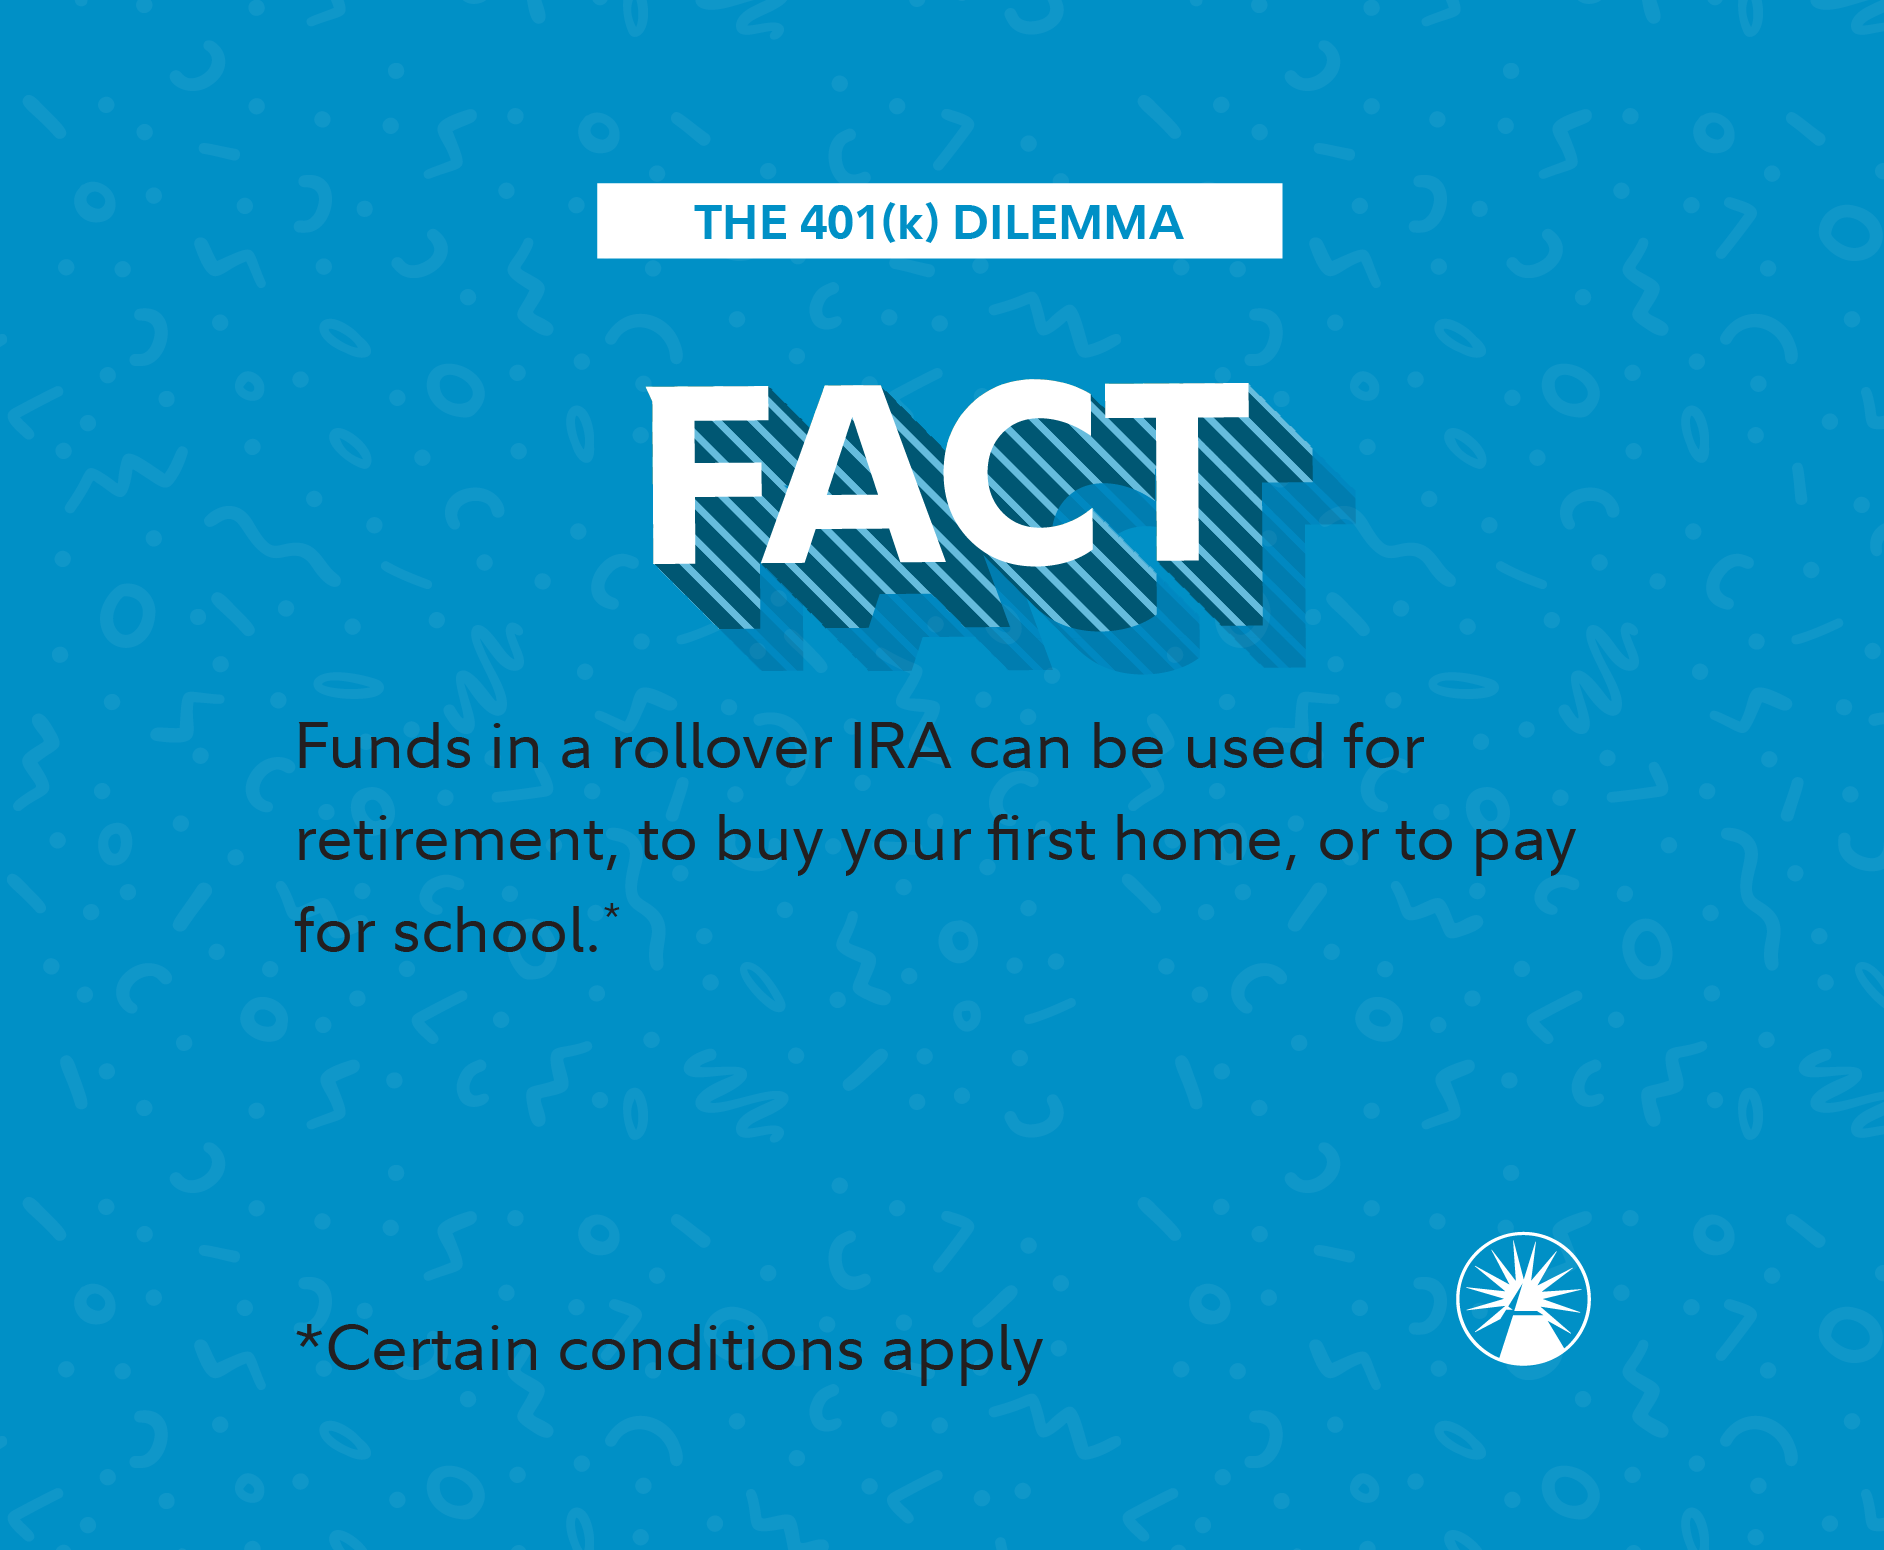 Fact  Funds in a rollover IRA can be used for retirement, to buy your first home, or to pay for school  Certain conditions apply